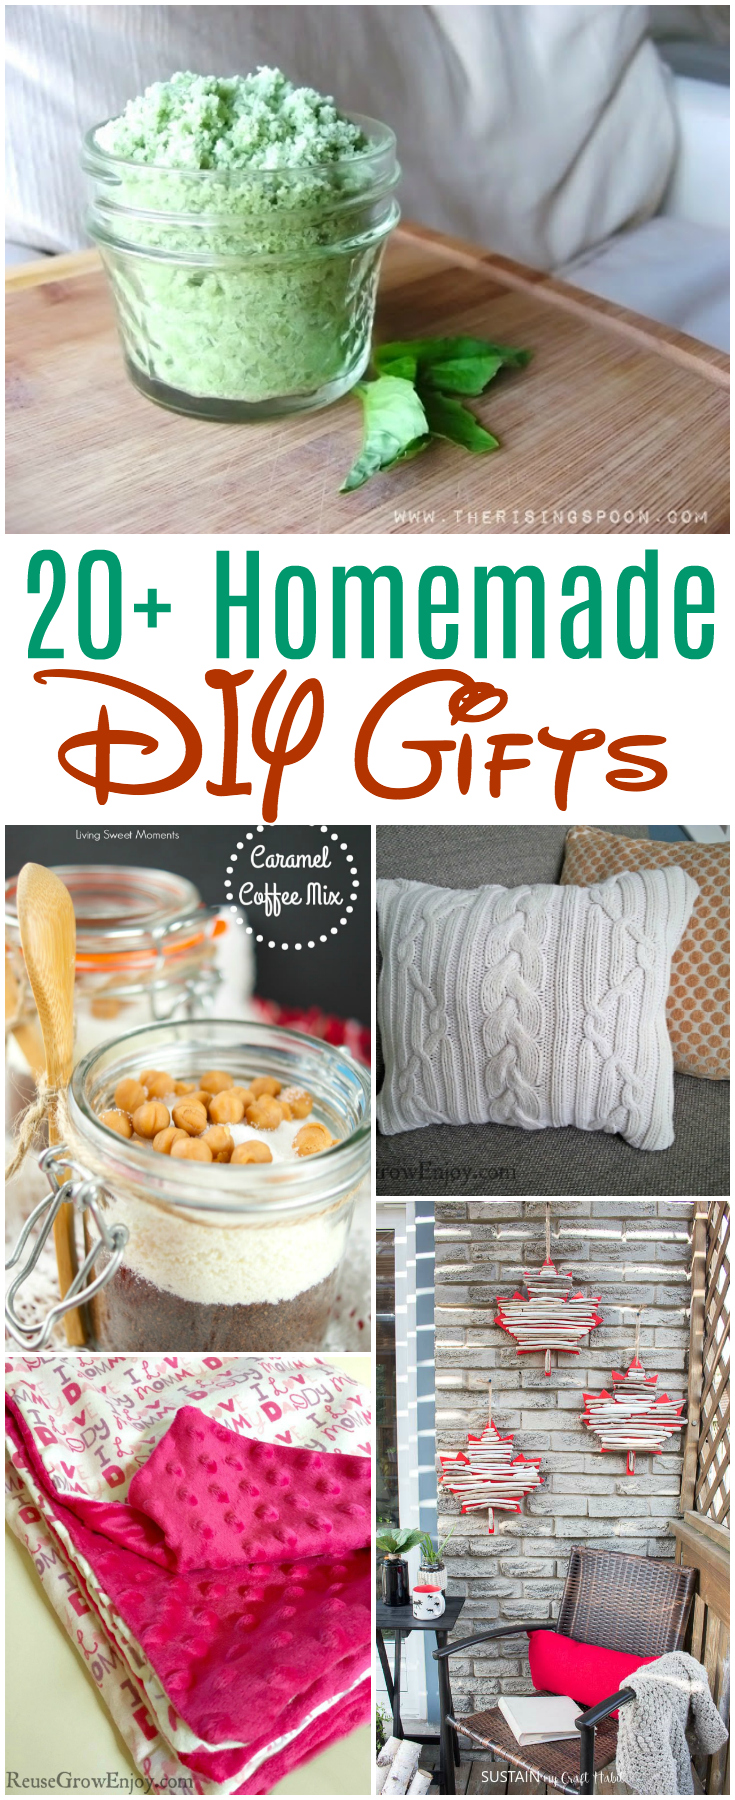 Over 20 Homemade DIY gifts from candied pecans to caramel coffee mix, candles and even cuddle blankets - perfect for people of all ages! #Christmas #Gifts #DIY #HomemadeGifts